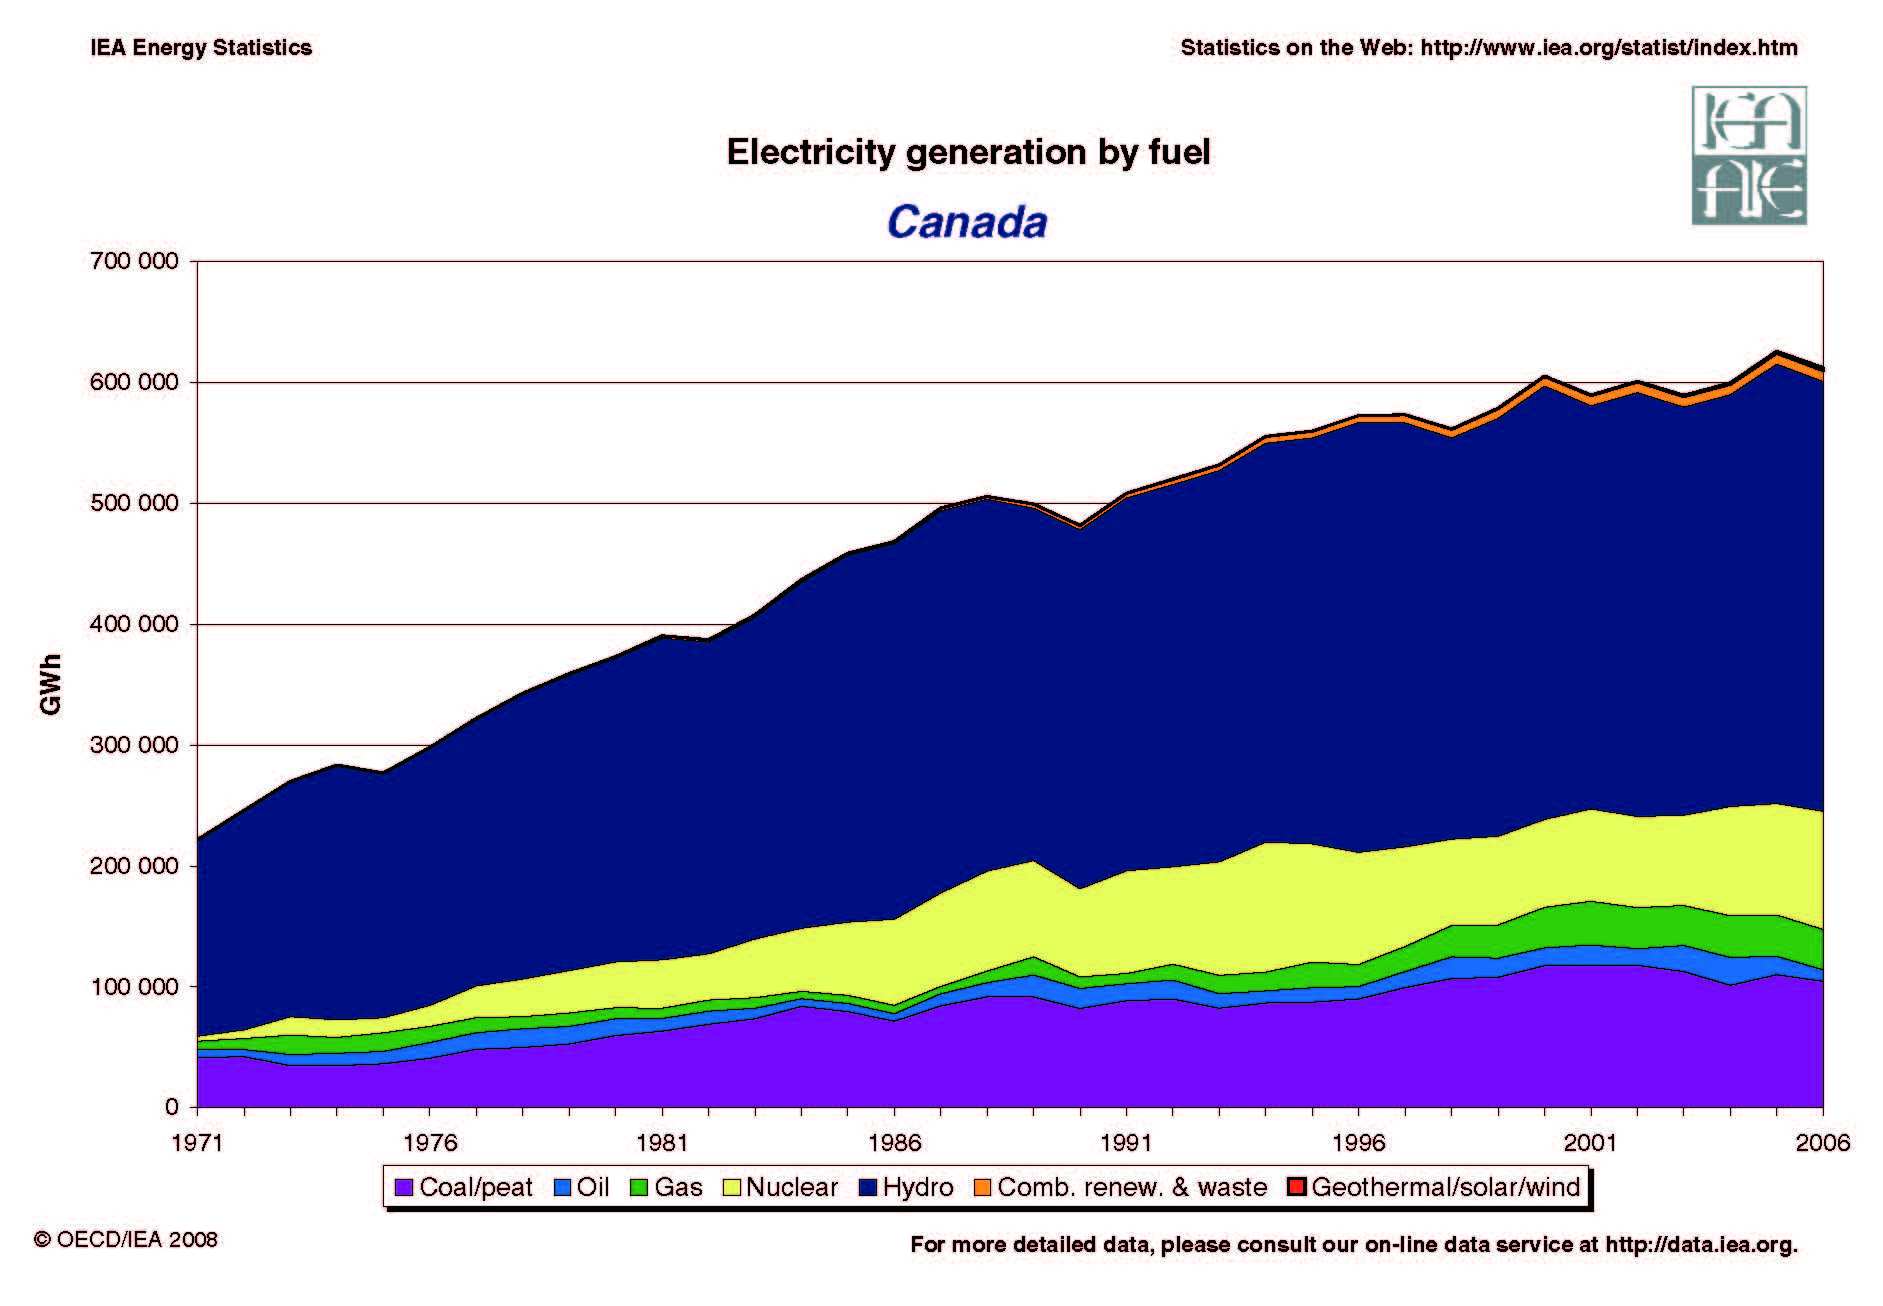 Electricity generation by fuel - Canada